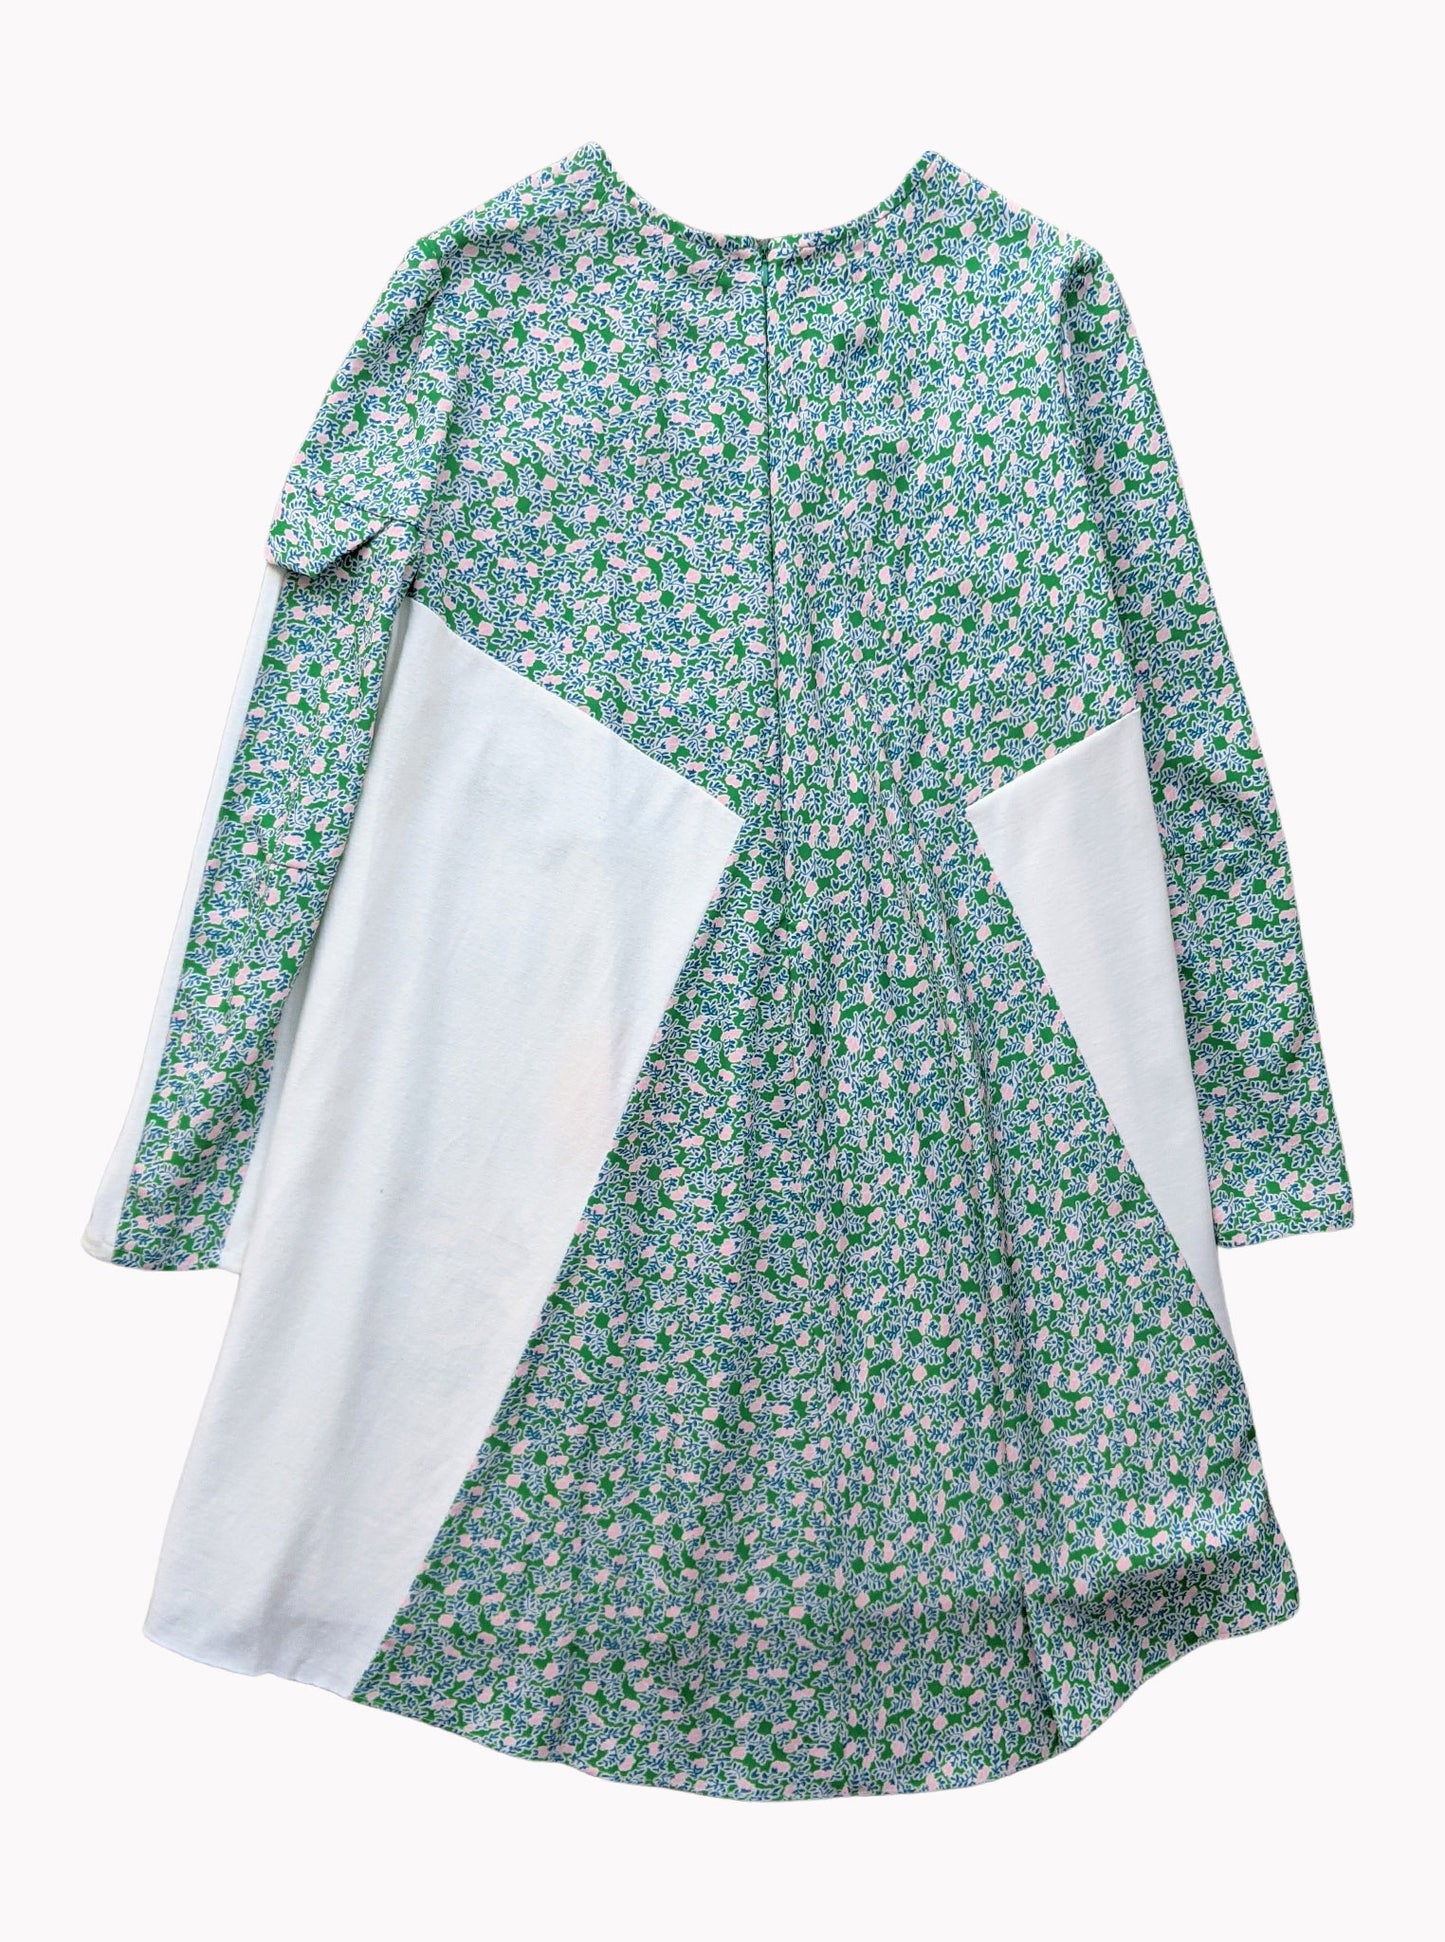 Vinti Andrews Upcycled T-Shirt Green Floral Dress